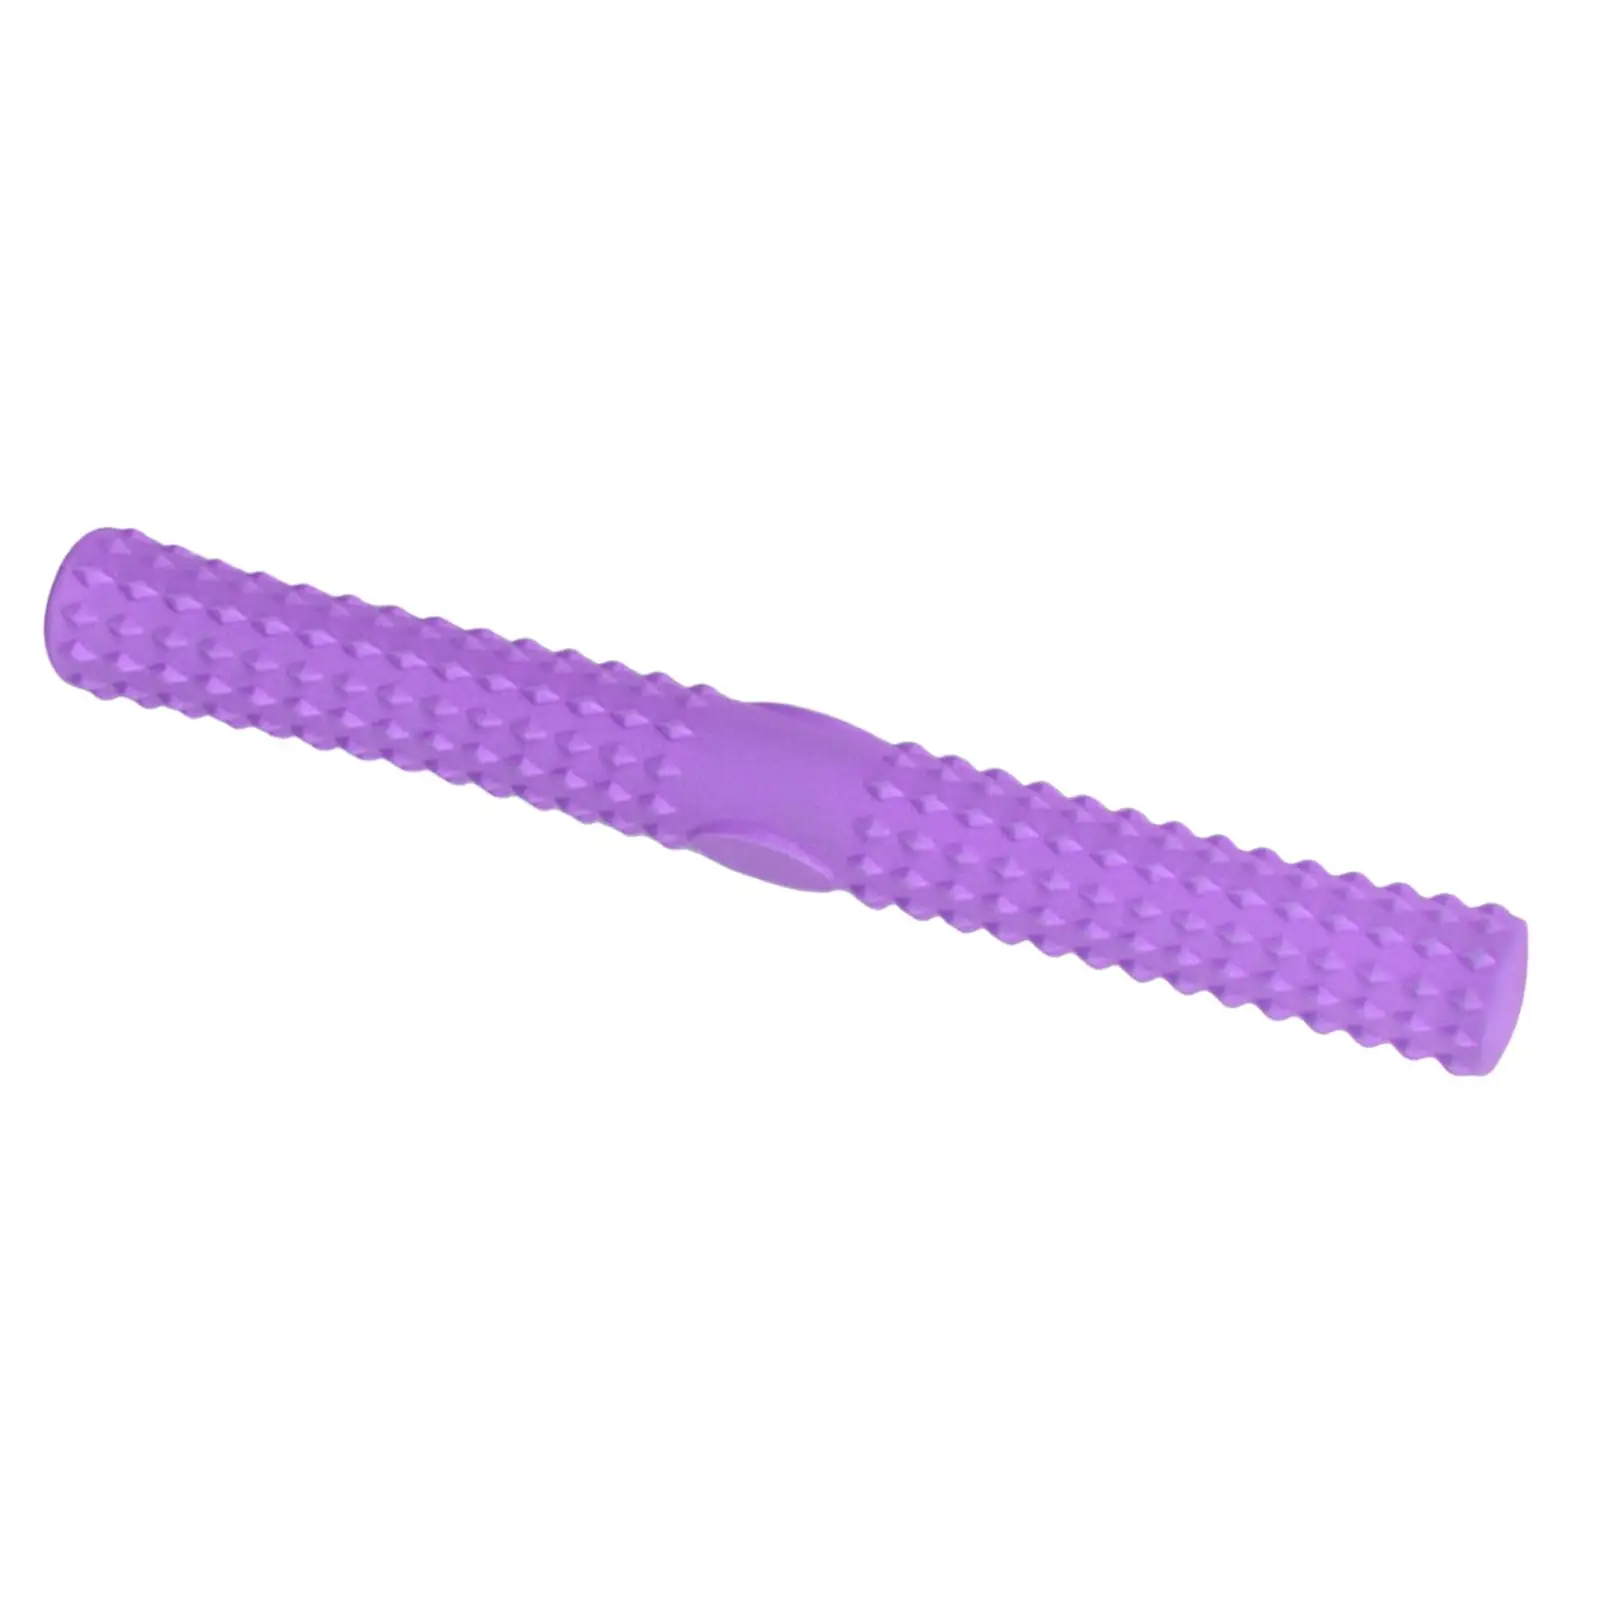 Twist Exerciser Bars Muscle Roller Adults Relaxing Resistance Training Bar